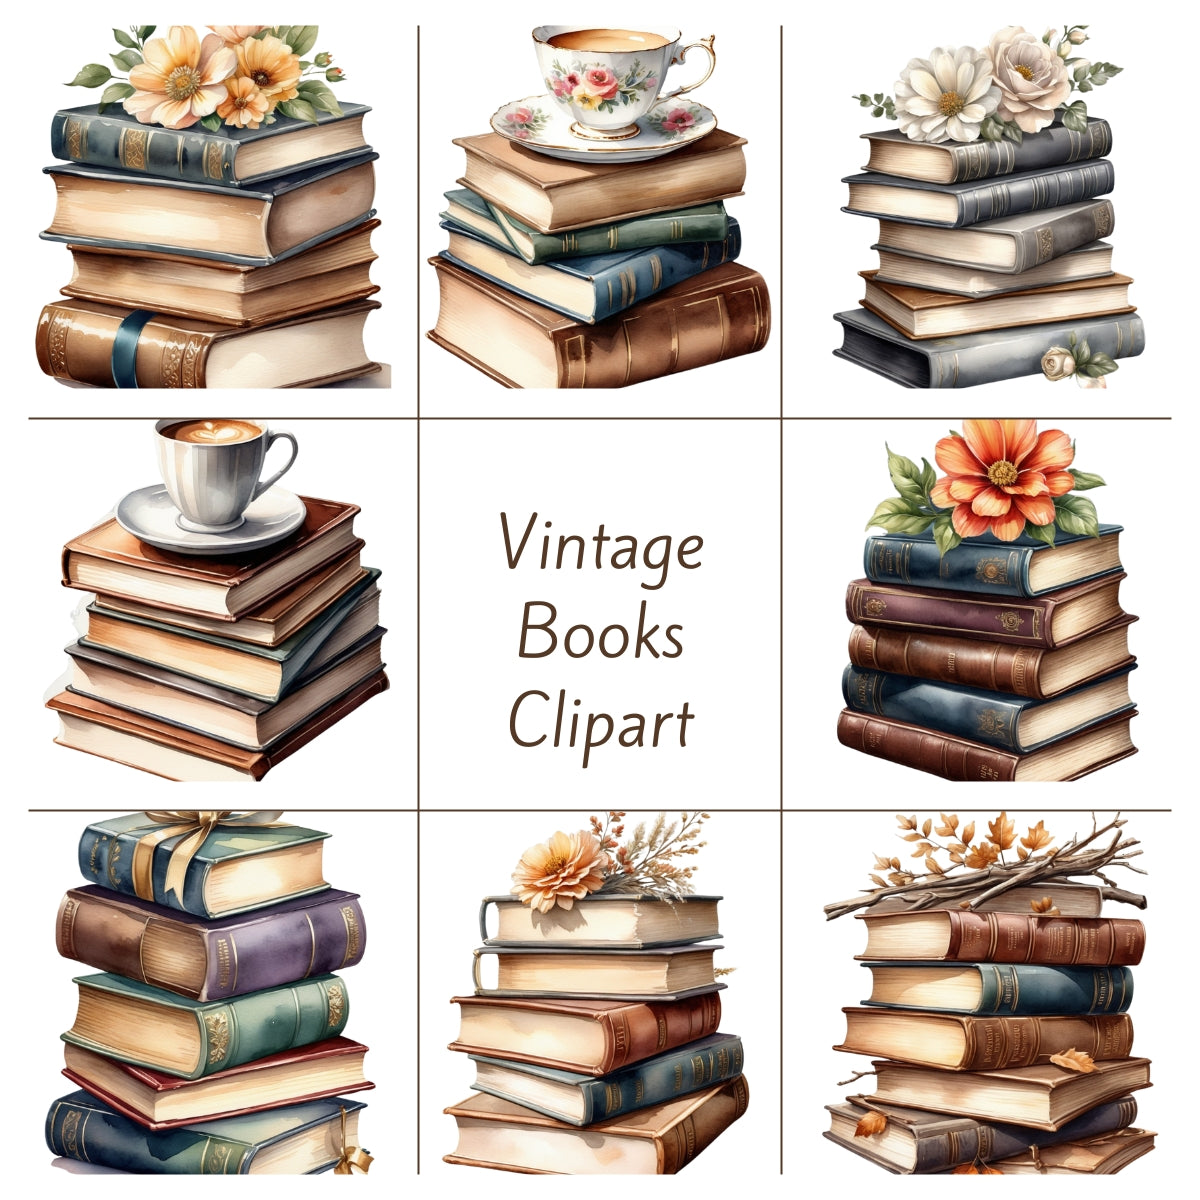 Watercolor Vintage Books Clipart, Books and Flowers Clipart, Clipart Images for Business